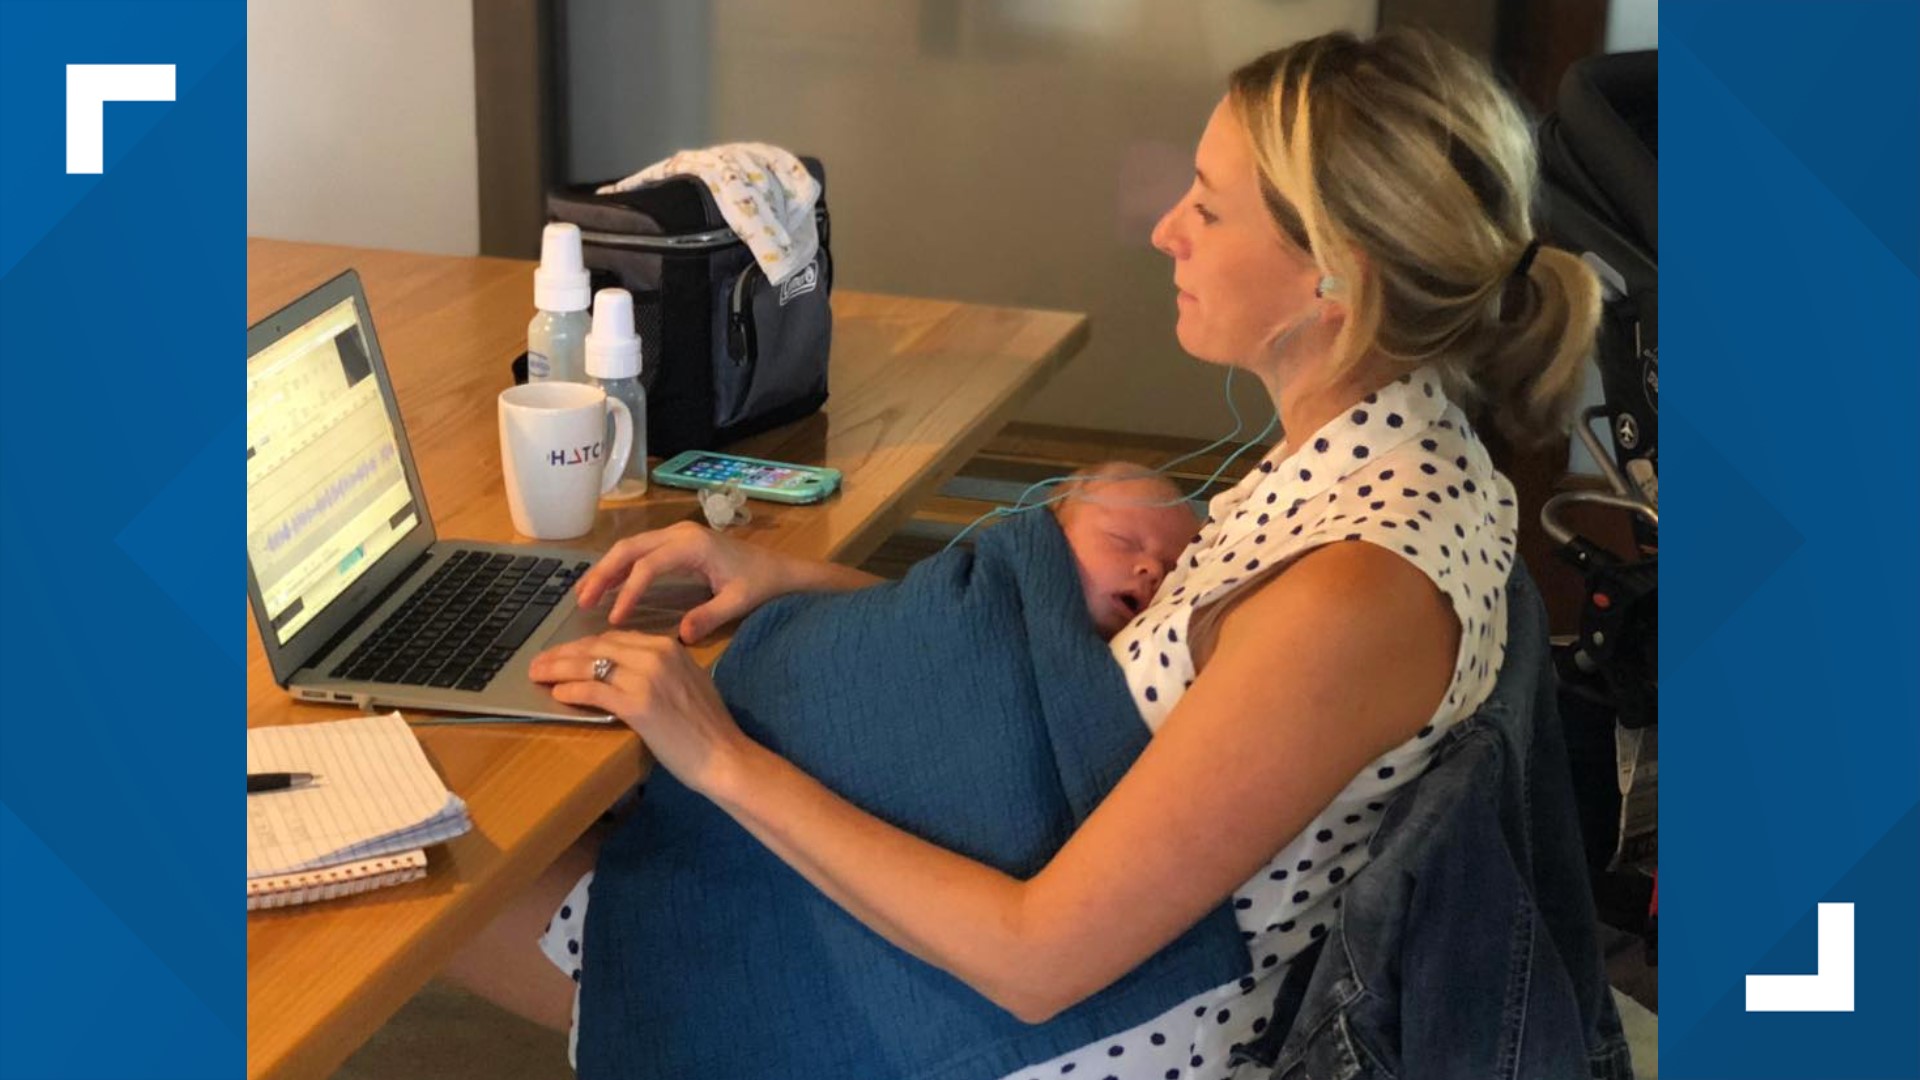 Lindsey Hein, podcaster and mom of four young boys, shares the keys to balancing kids, home life and work life — while still finding time for yourself.